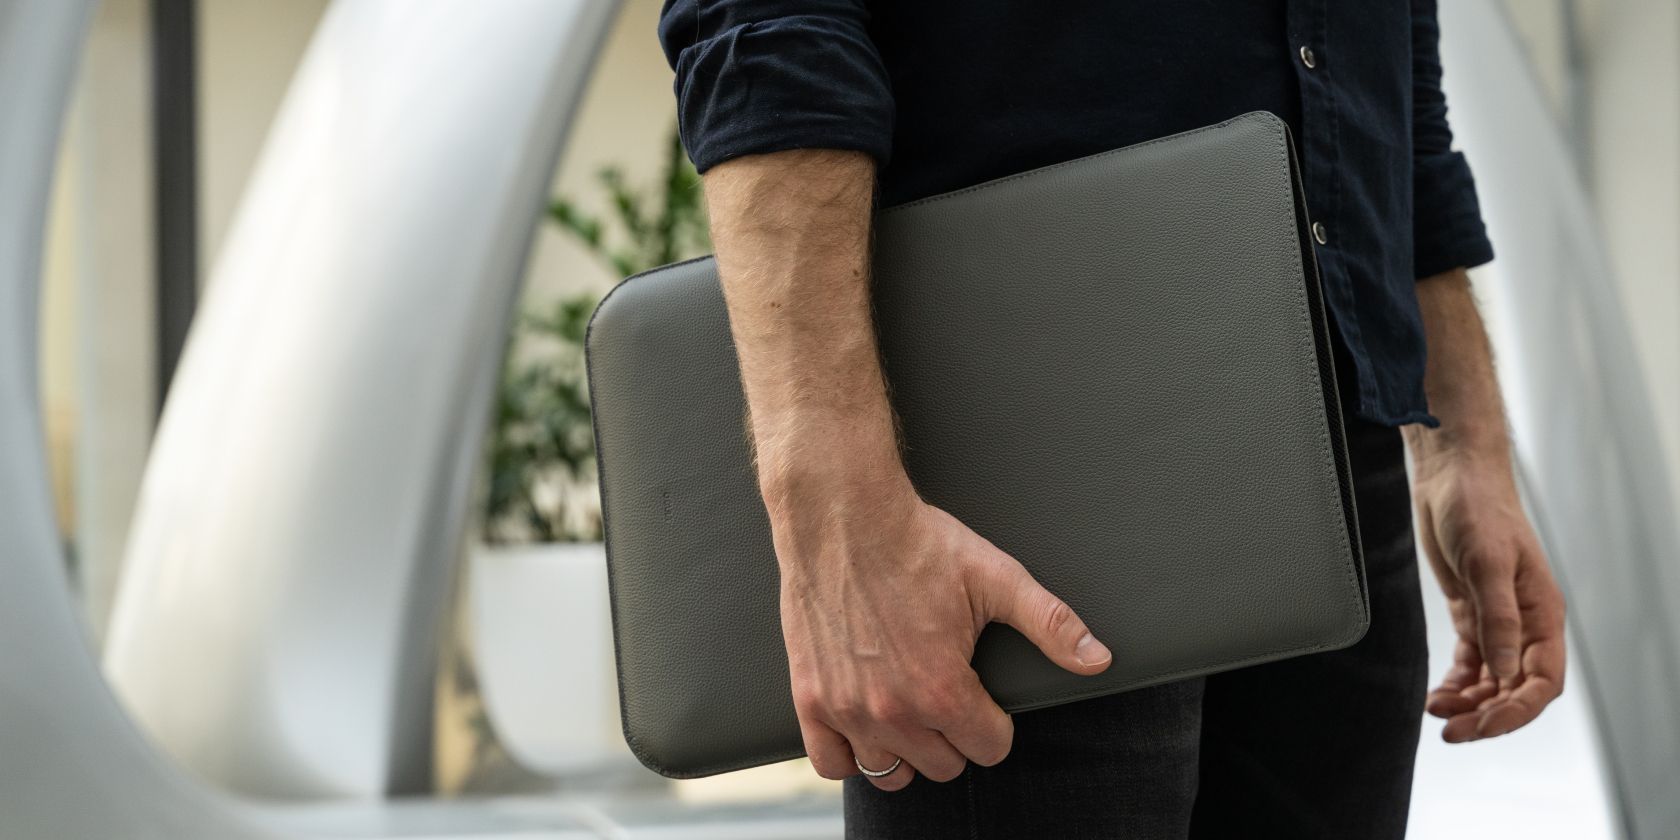 Peron holding a laptop in a leather sleeve at waist level